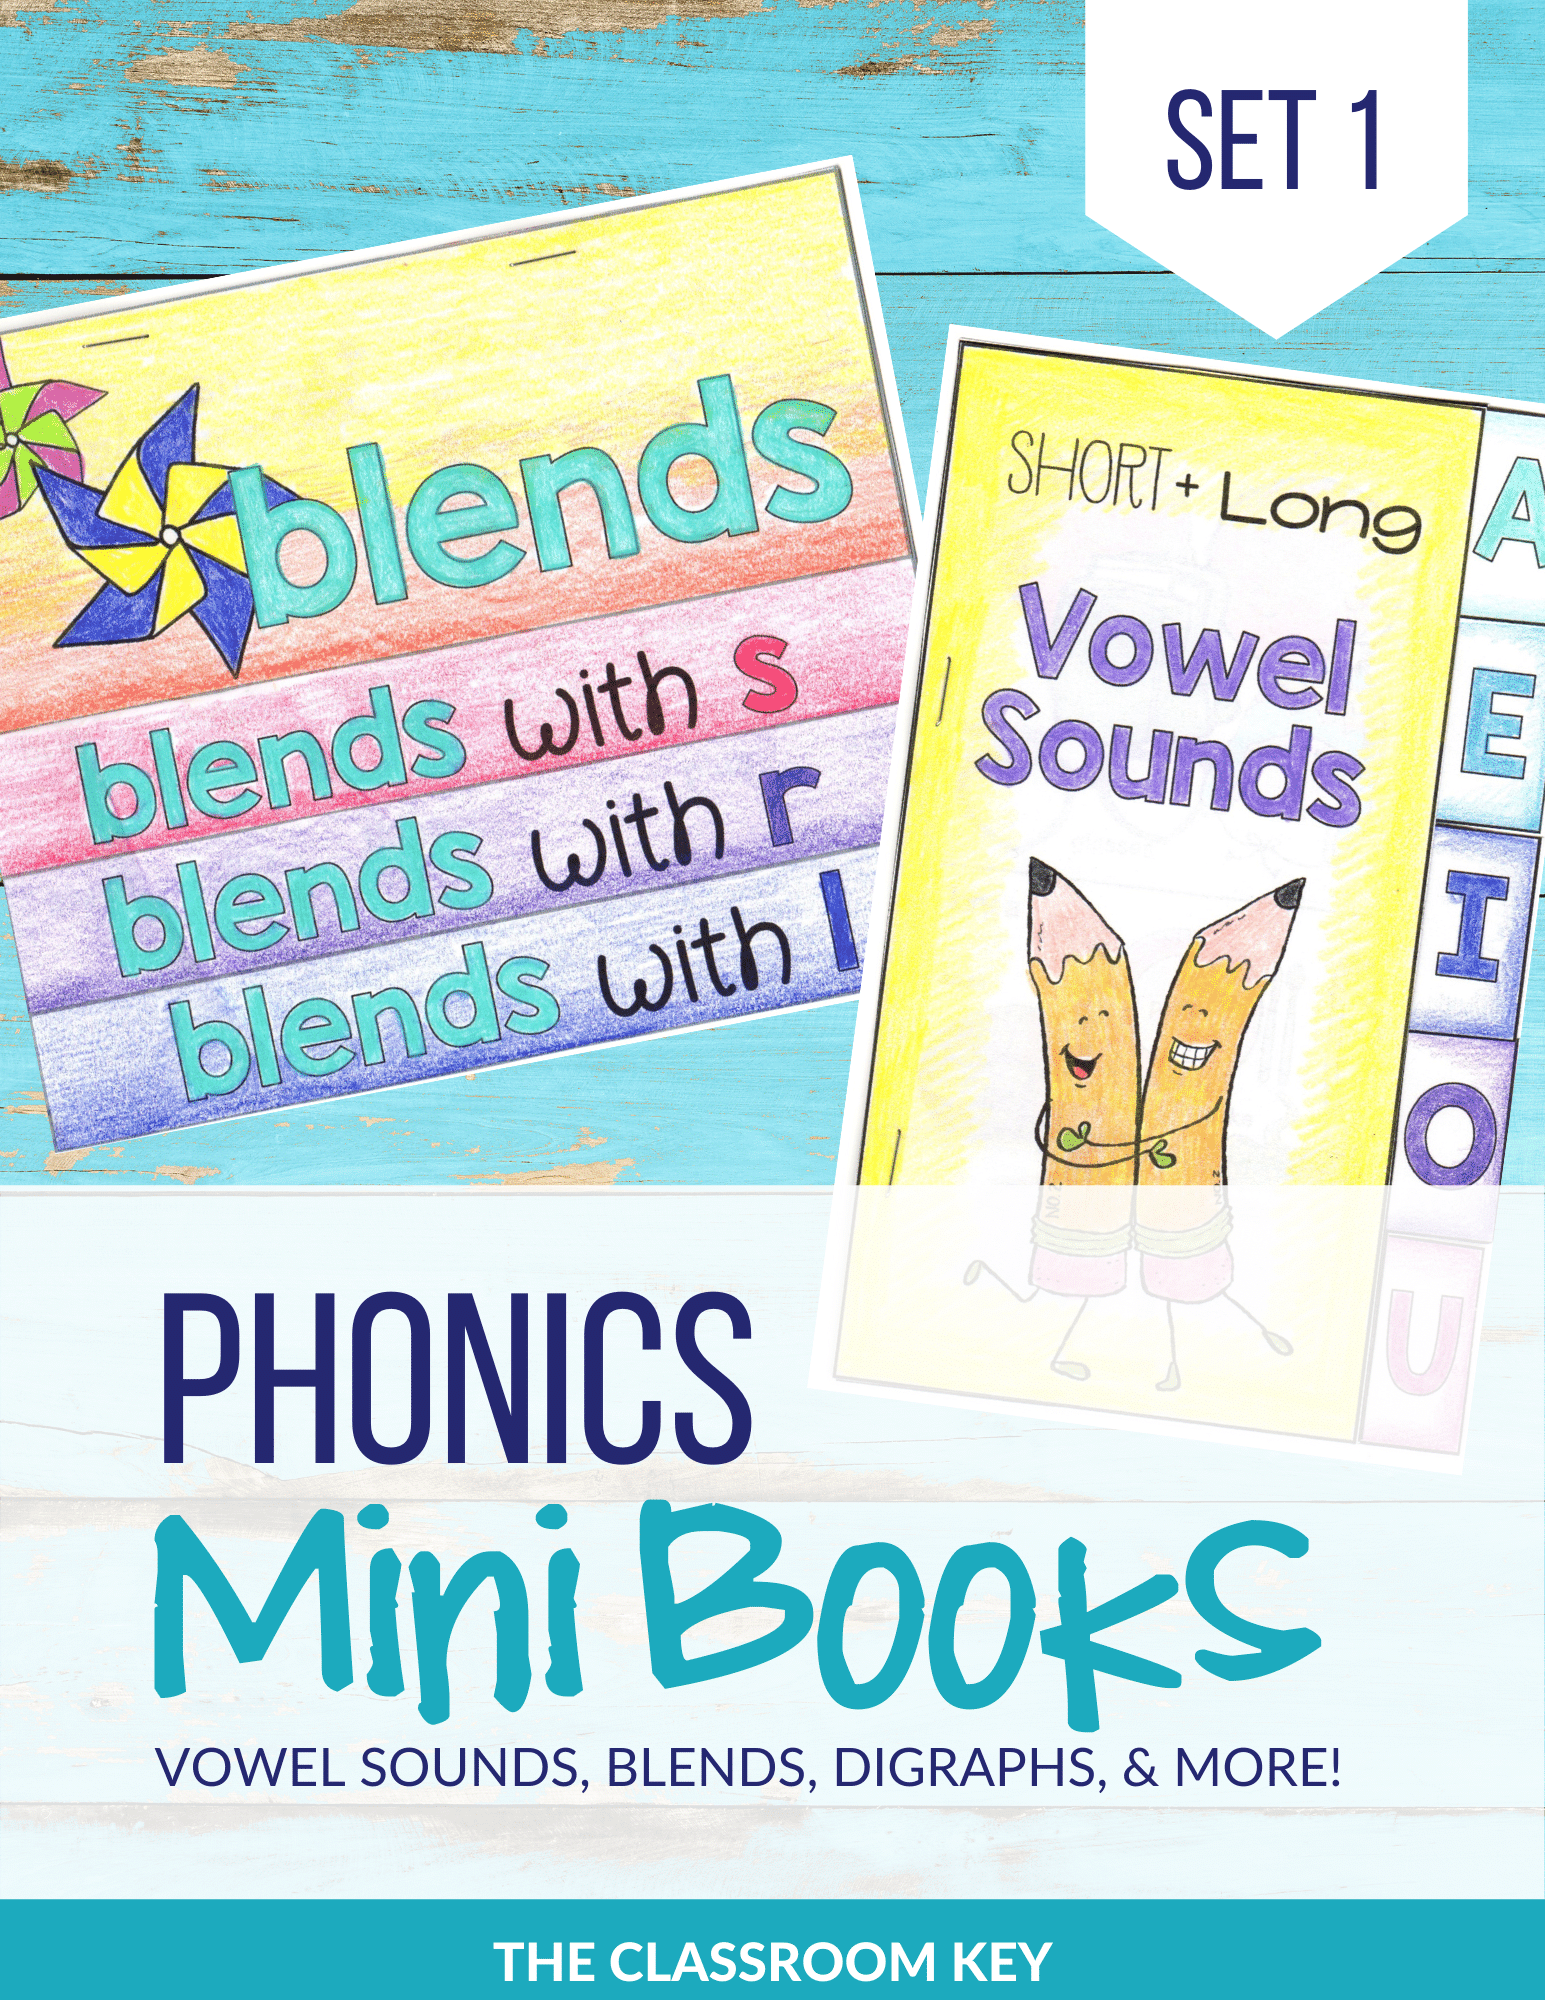 Teach phonics skills with these mini books. Each page features words lists for phonics patterns. Skills include, blends, digraphs, vowel sounds, glued sounds, CVCe patterns, and more. Idea for a first a second grade class